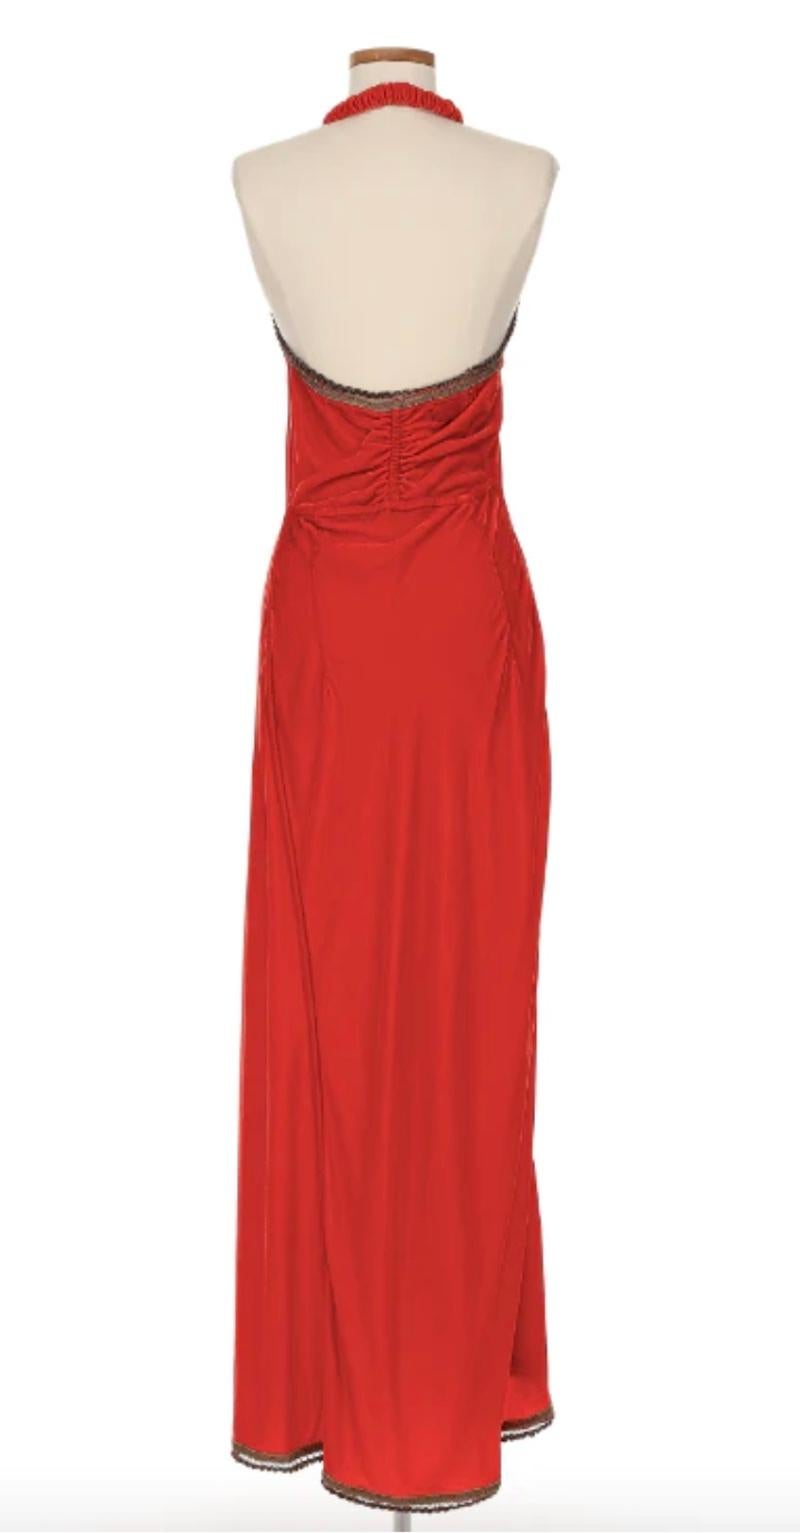 Voyage Orange Velvet Halter Dress. Considered the 90s cult London label, Voyage was a coveted brand loved for its eclectic and quirky designs. Worn by Kate Moss, Linda Evangelista and the other 